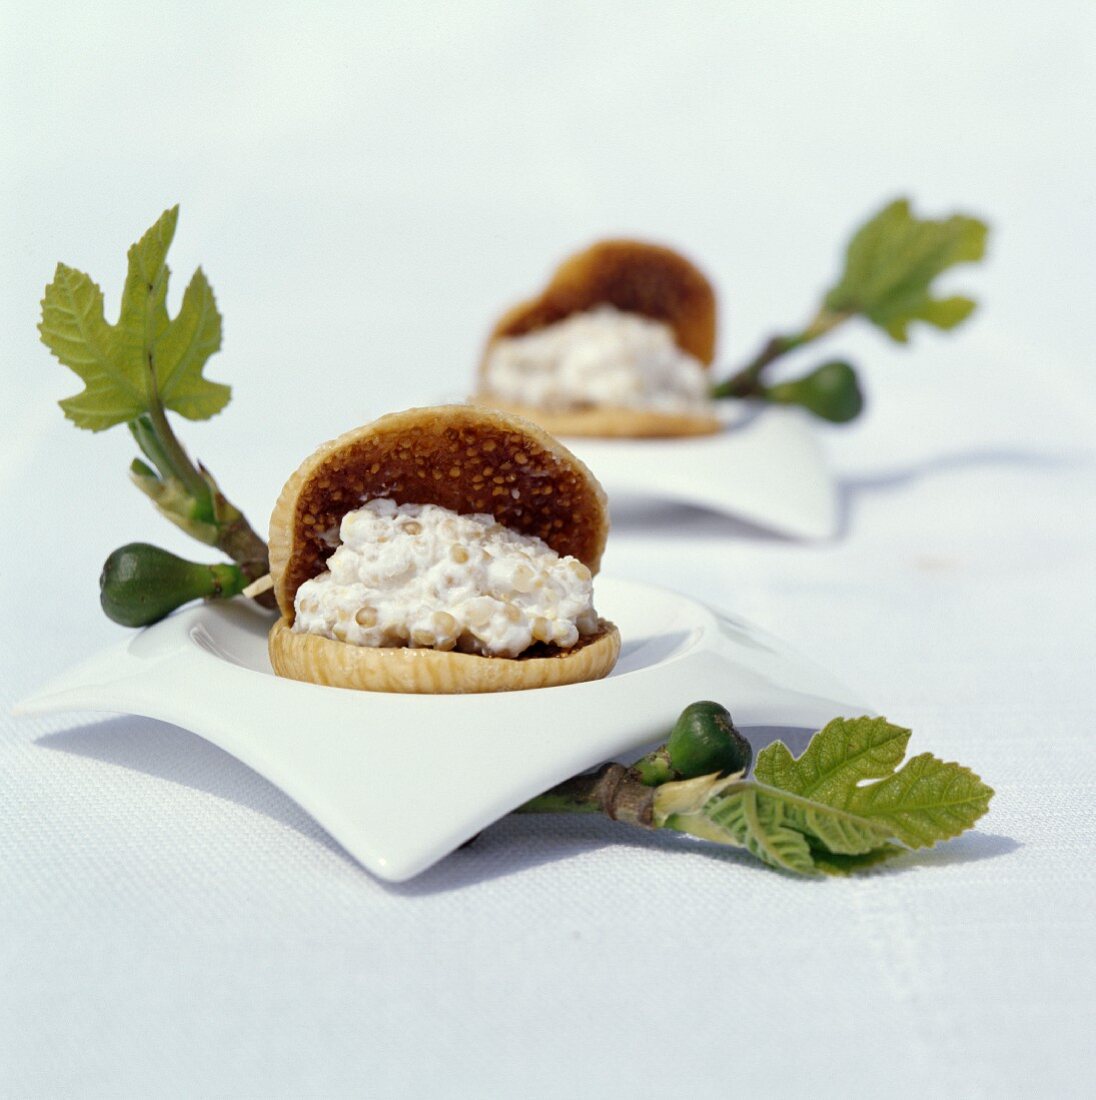 Dried figs filled with ricotta, quinoa and walnuts